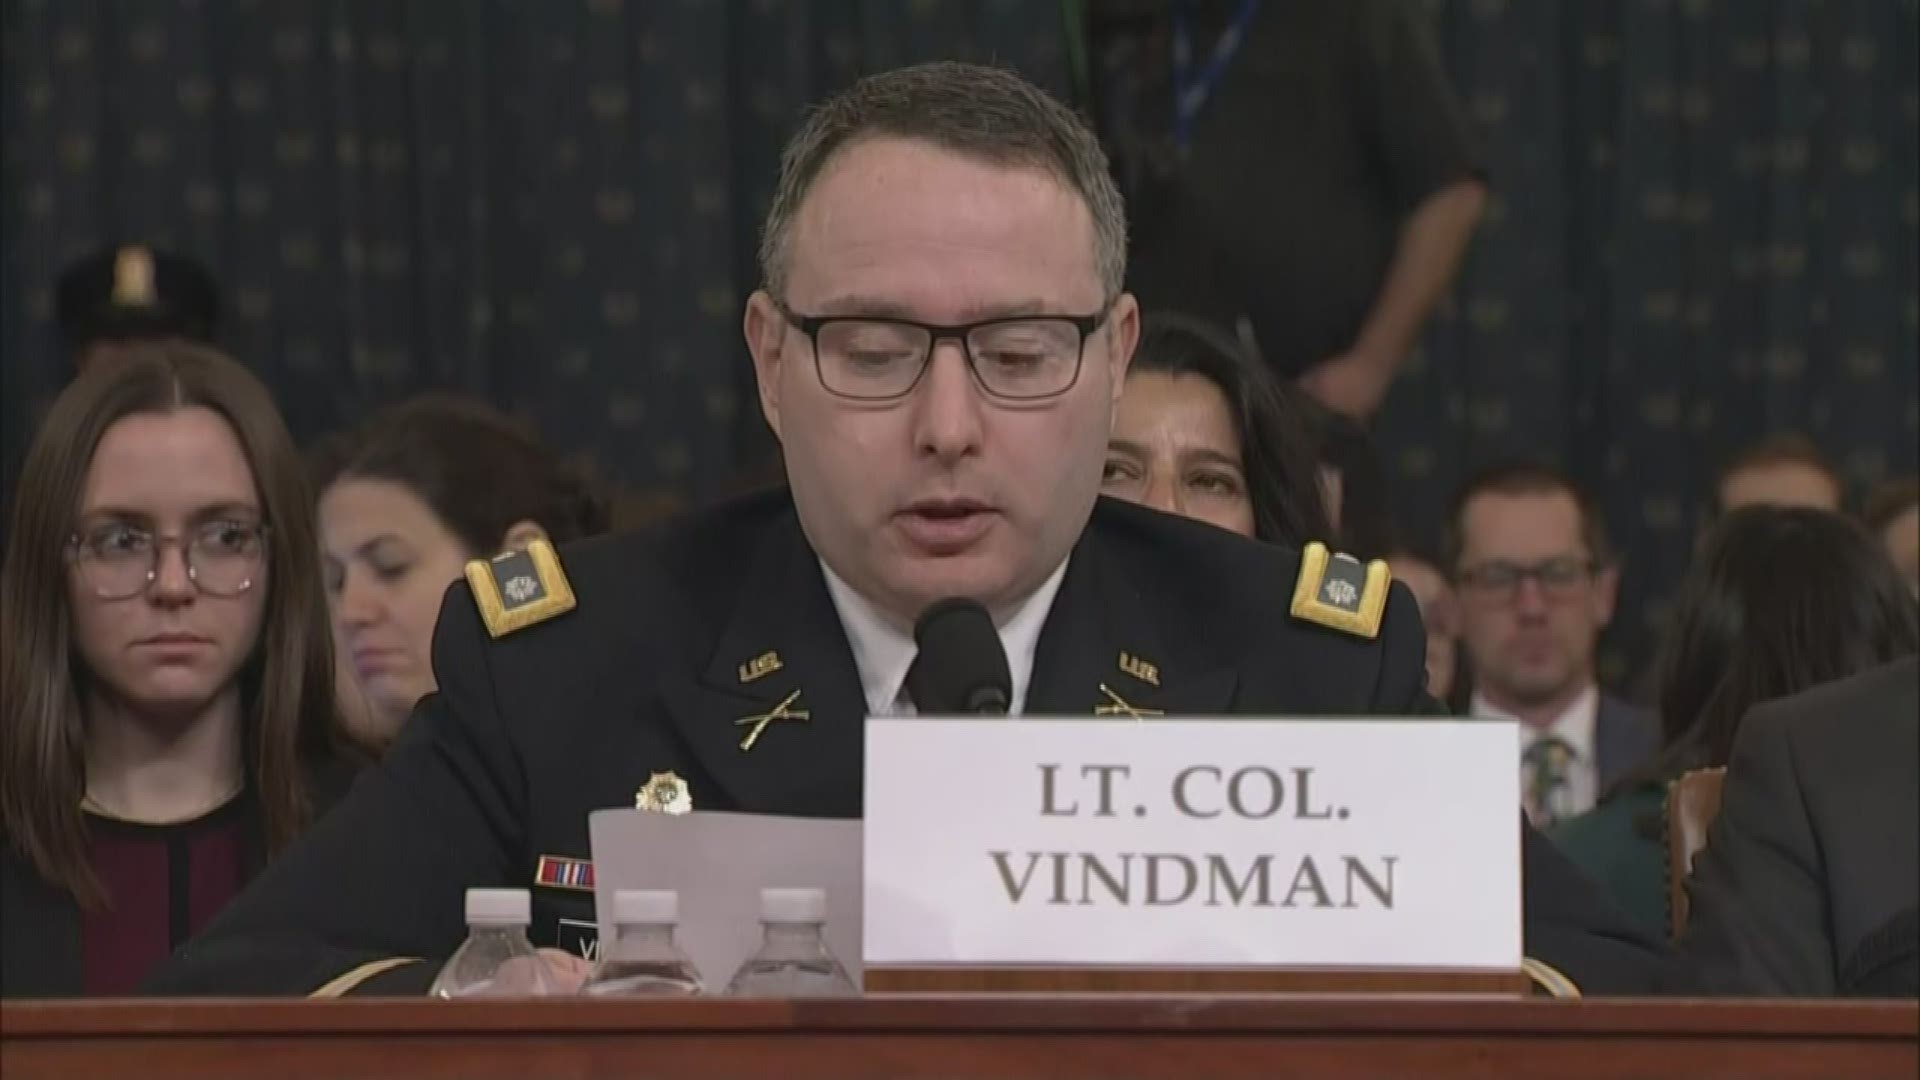 Vindman is a U.S. Army officer detailed to the National Security Council. He listened in on the July 25 call at the center of the impeachment inquiry.